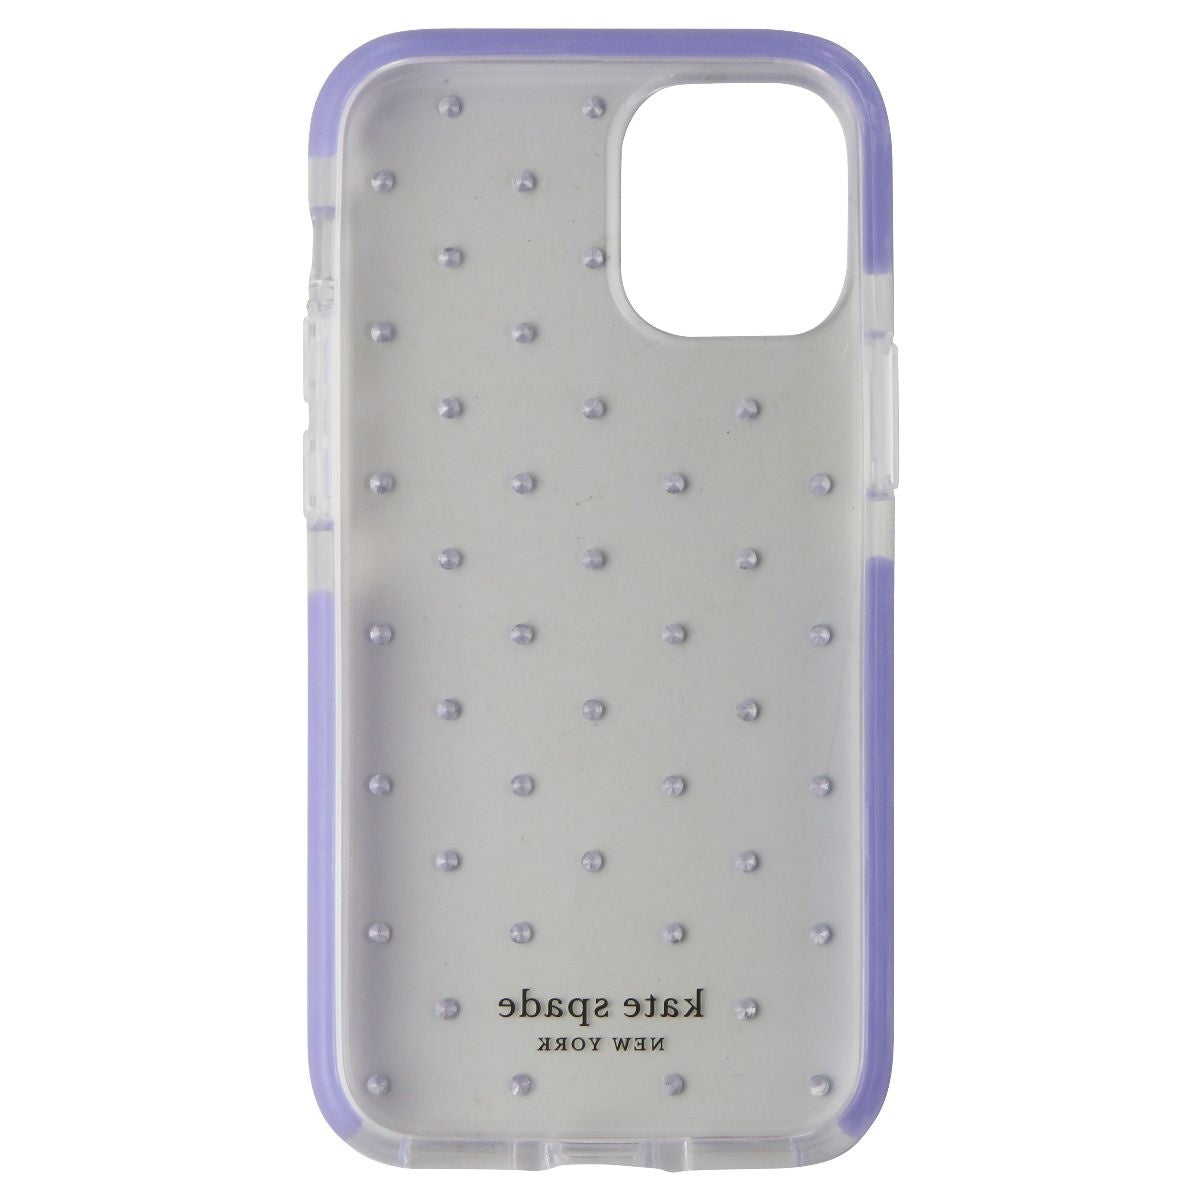 Kate Spade Defensive Hardshell Case for iPhone 12 Mini - Pin Dot Gems / Lilac Cell Phone - Cases, Covers & Skins Kate Spade    - Simple Cell Bulk Wholesale Pricing - USA Seller